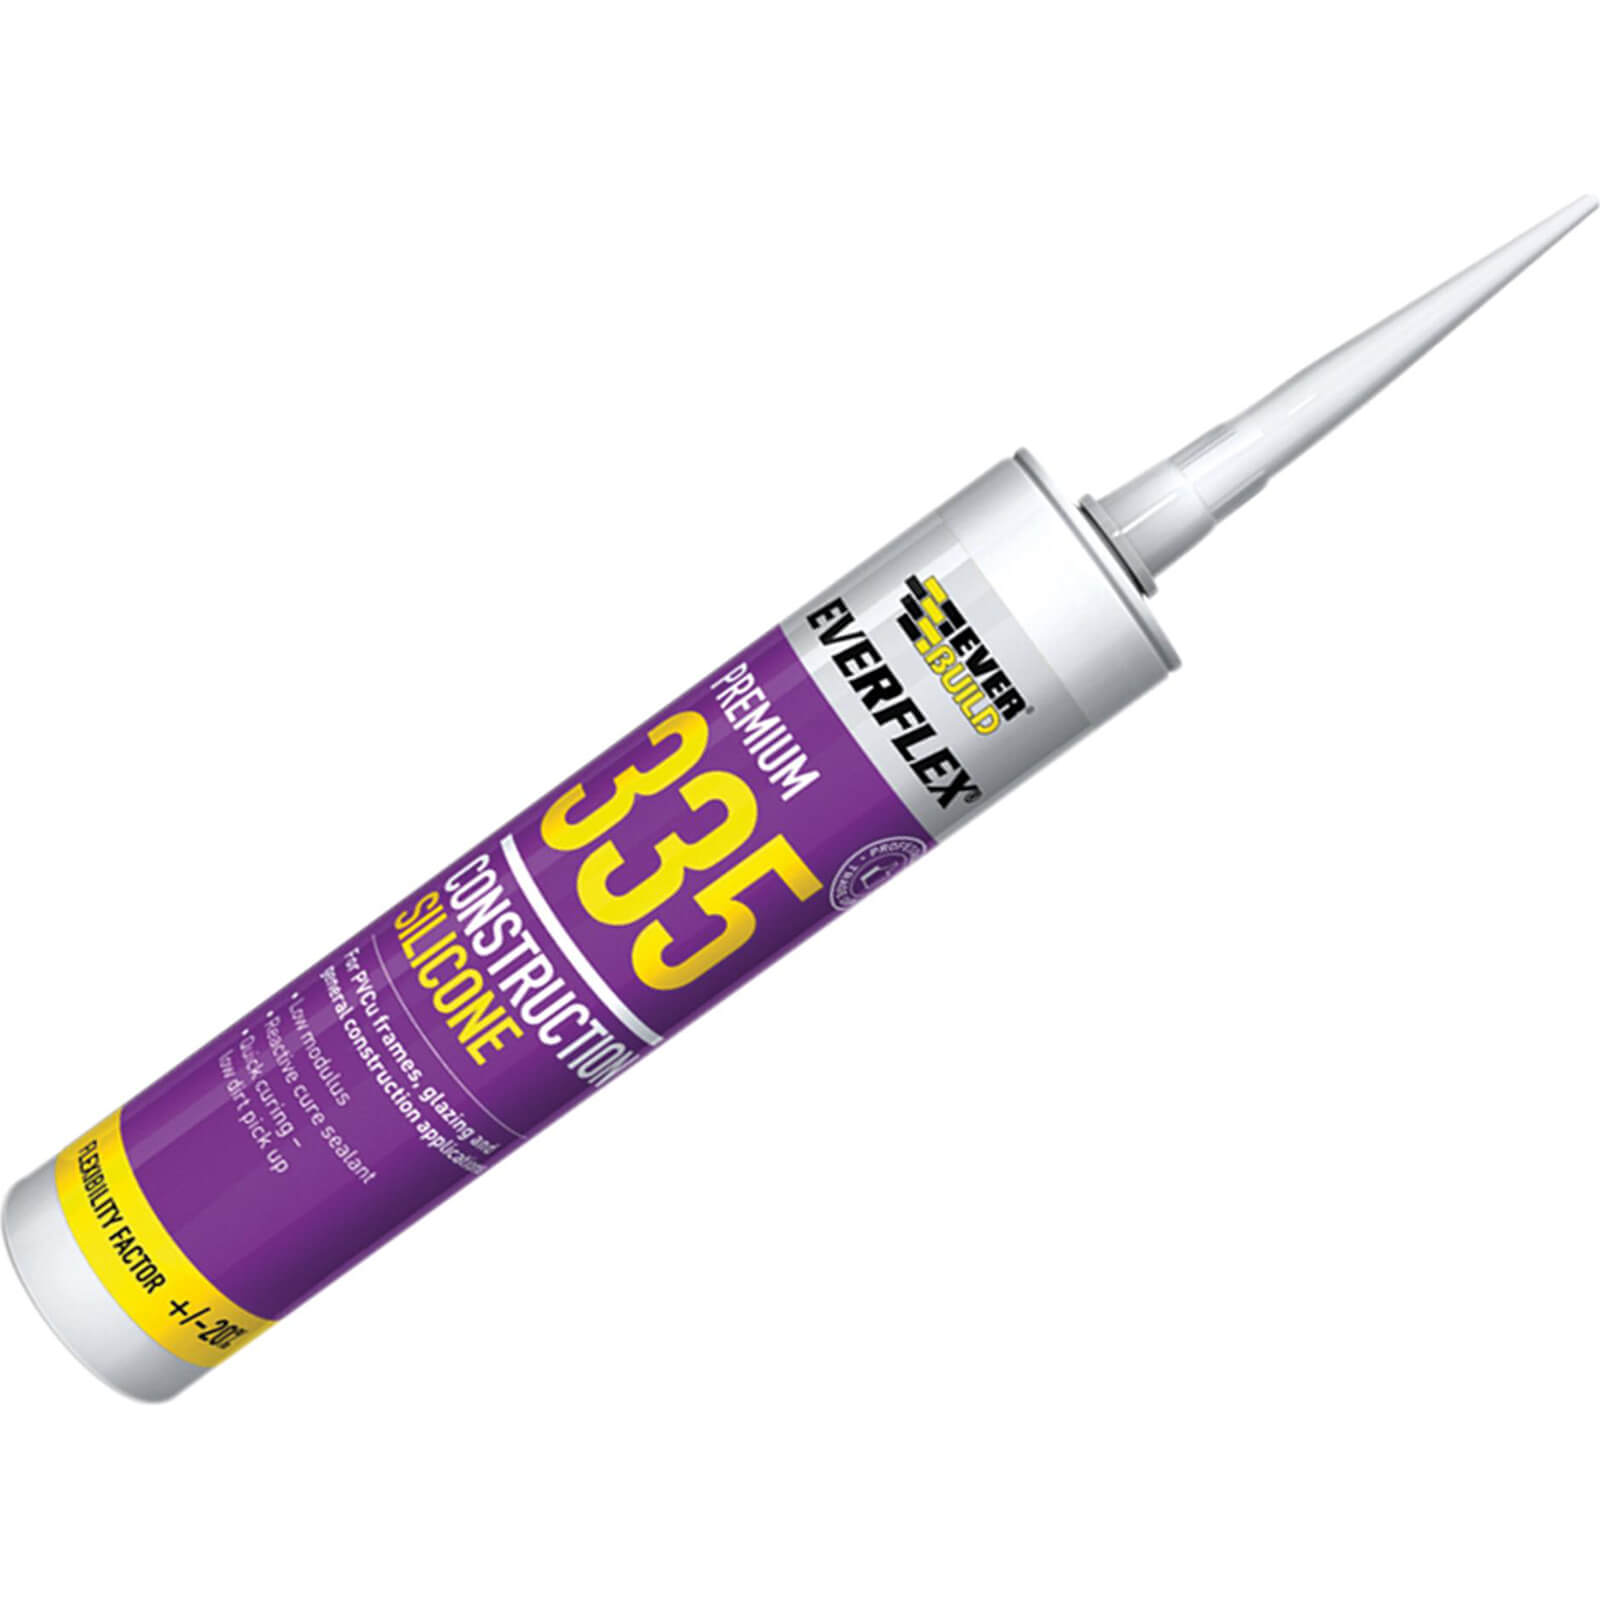 Image of Everbuild Construction Silicone Sealant Clear 310ml